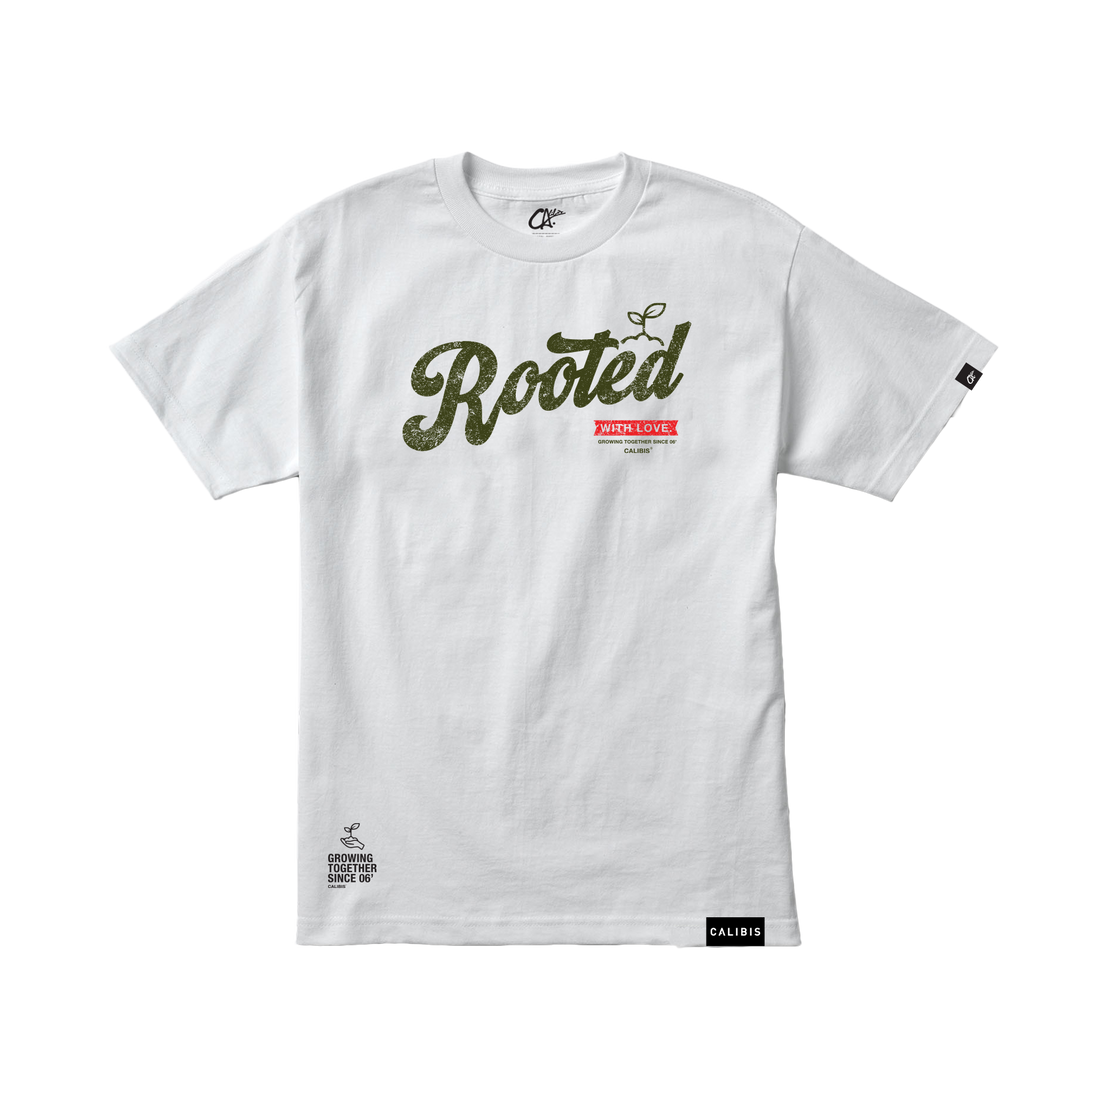 Rooted T-Shirt